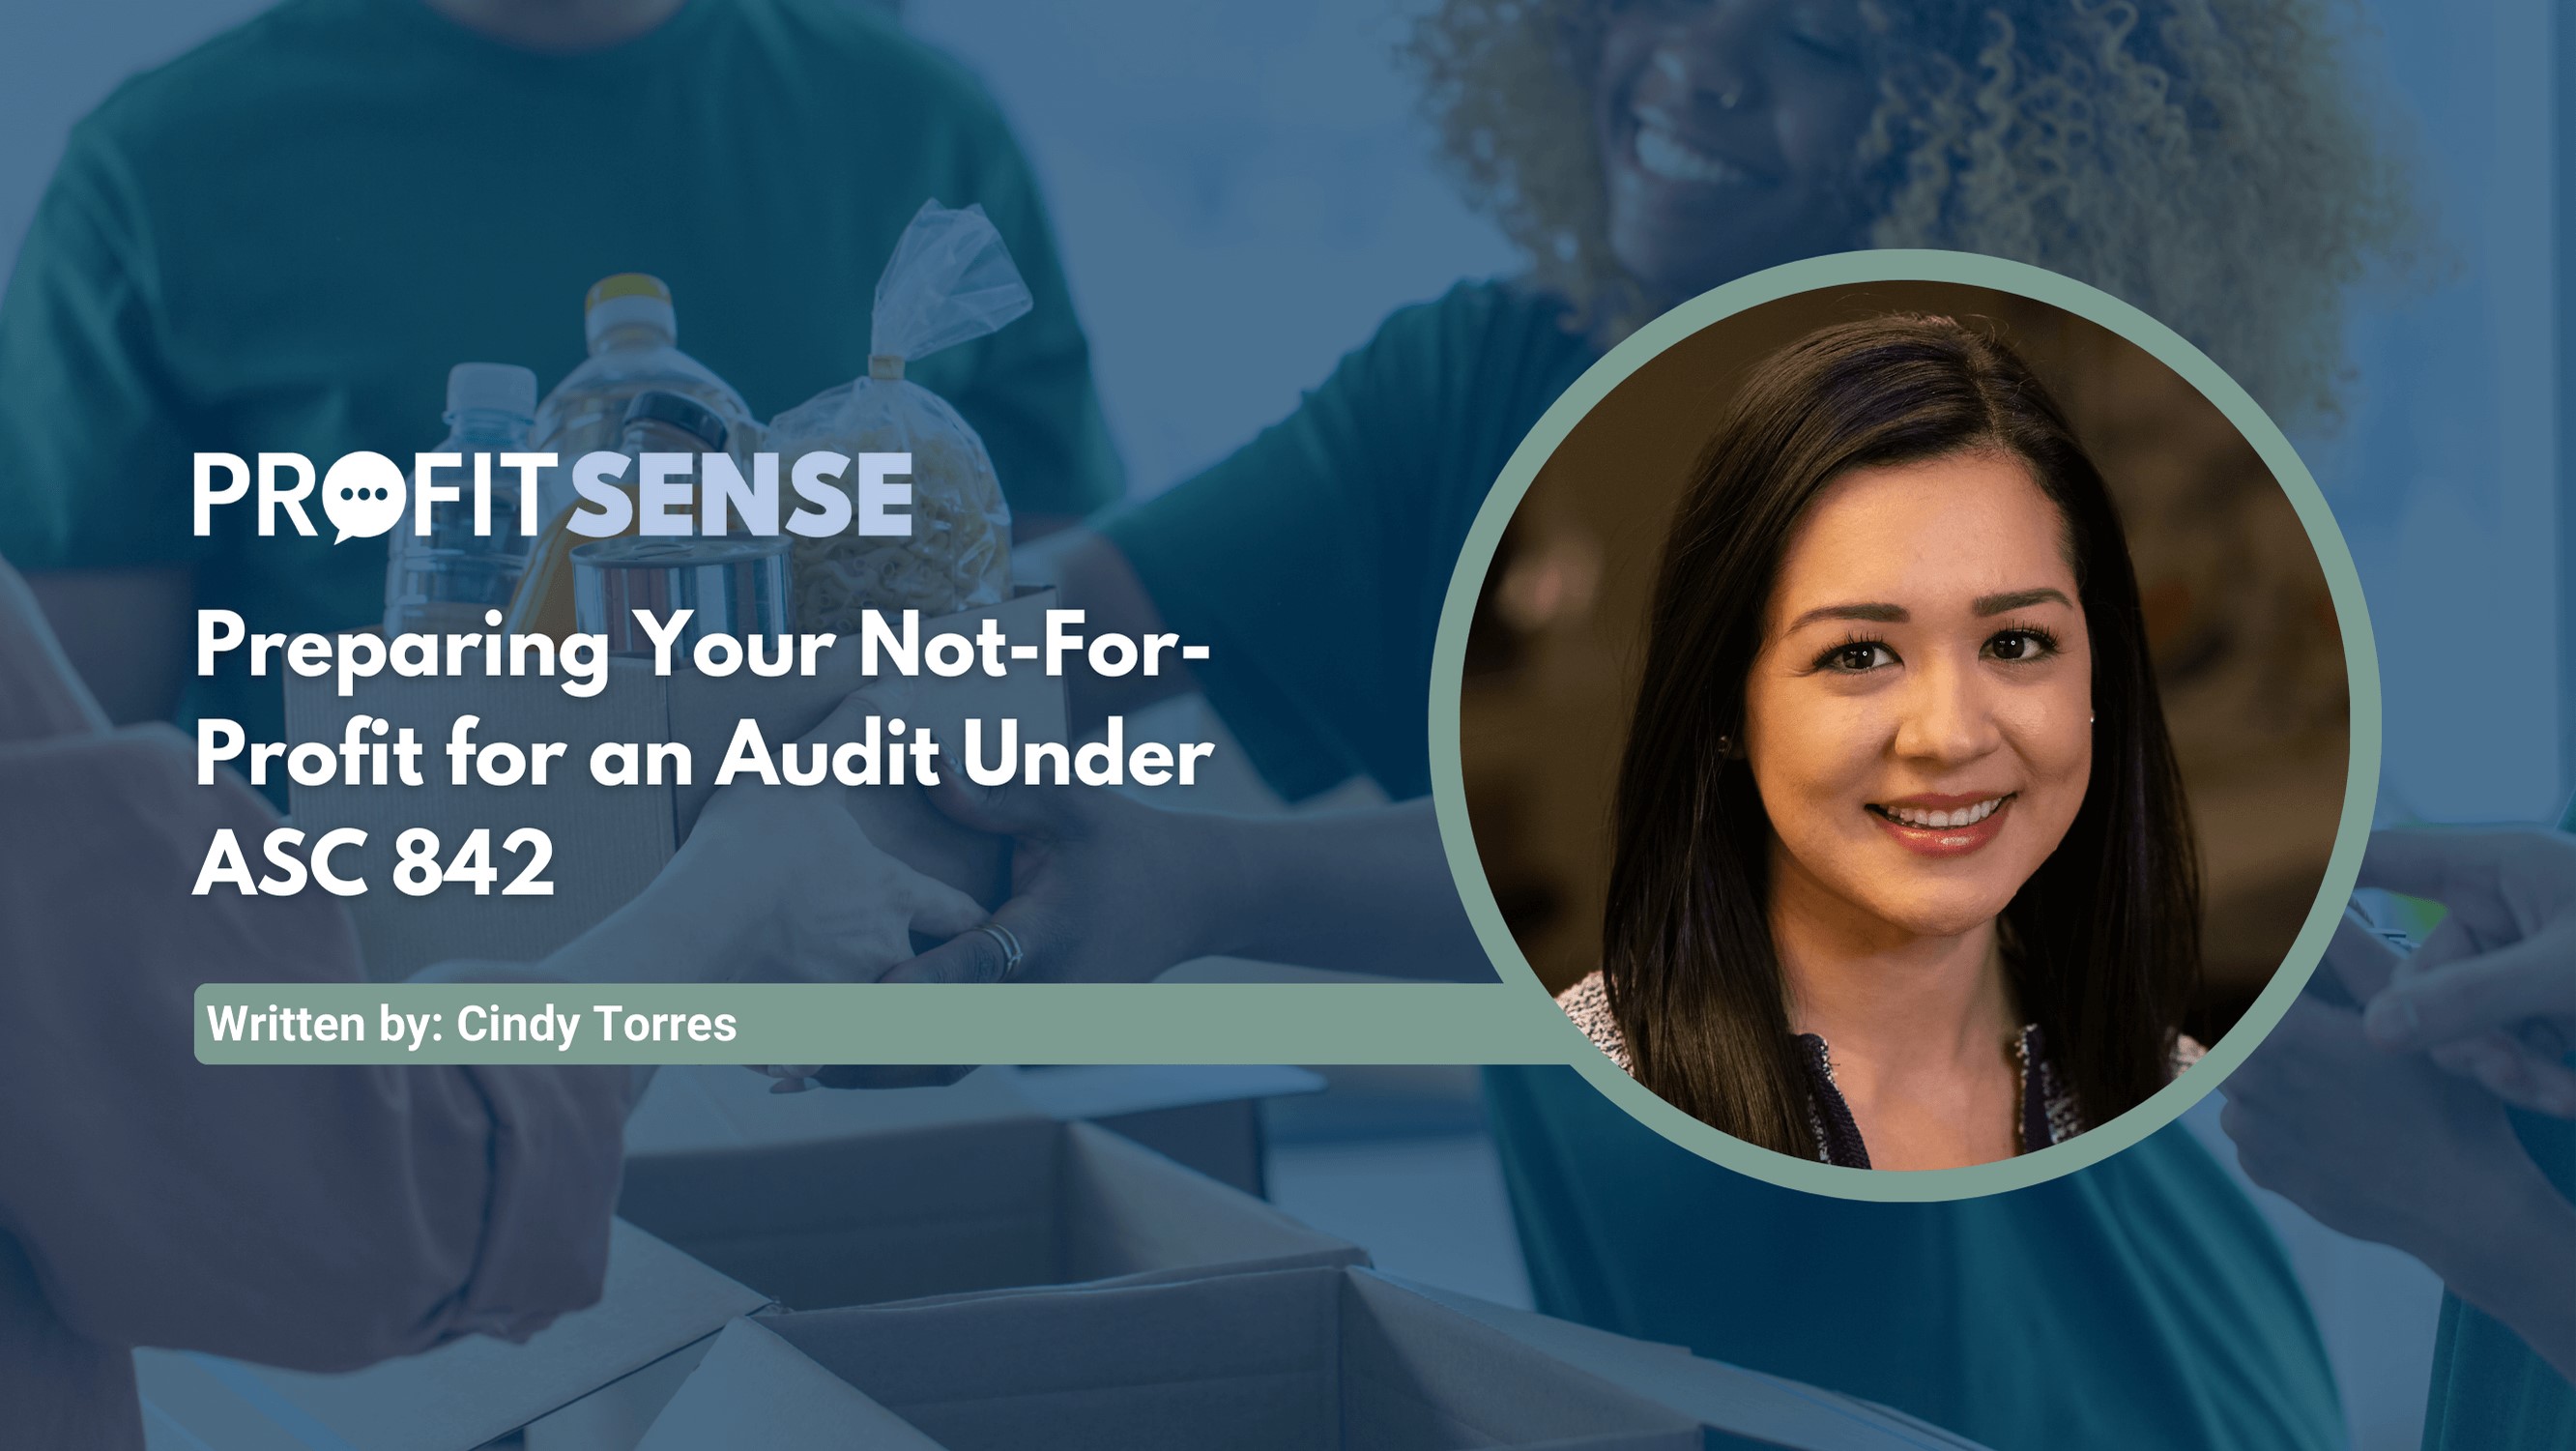 Preparing Your Not-For-Profit for an Audit Under ASC 842